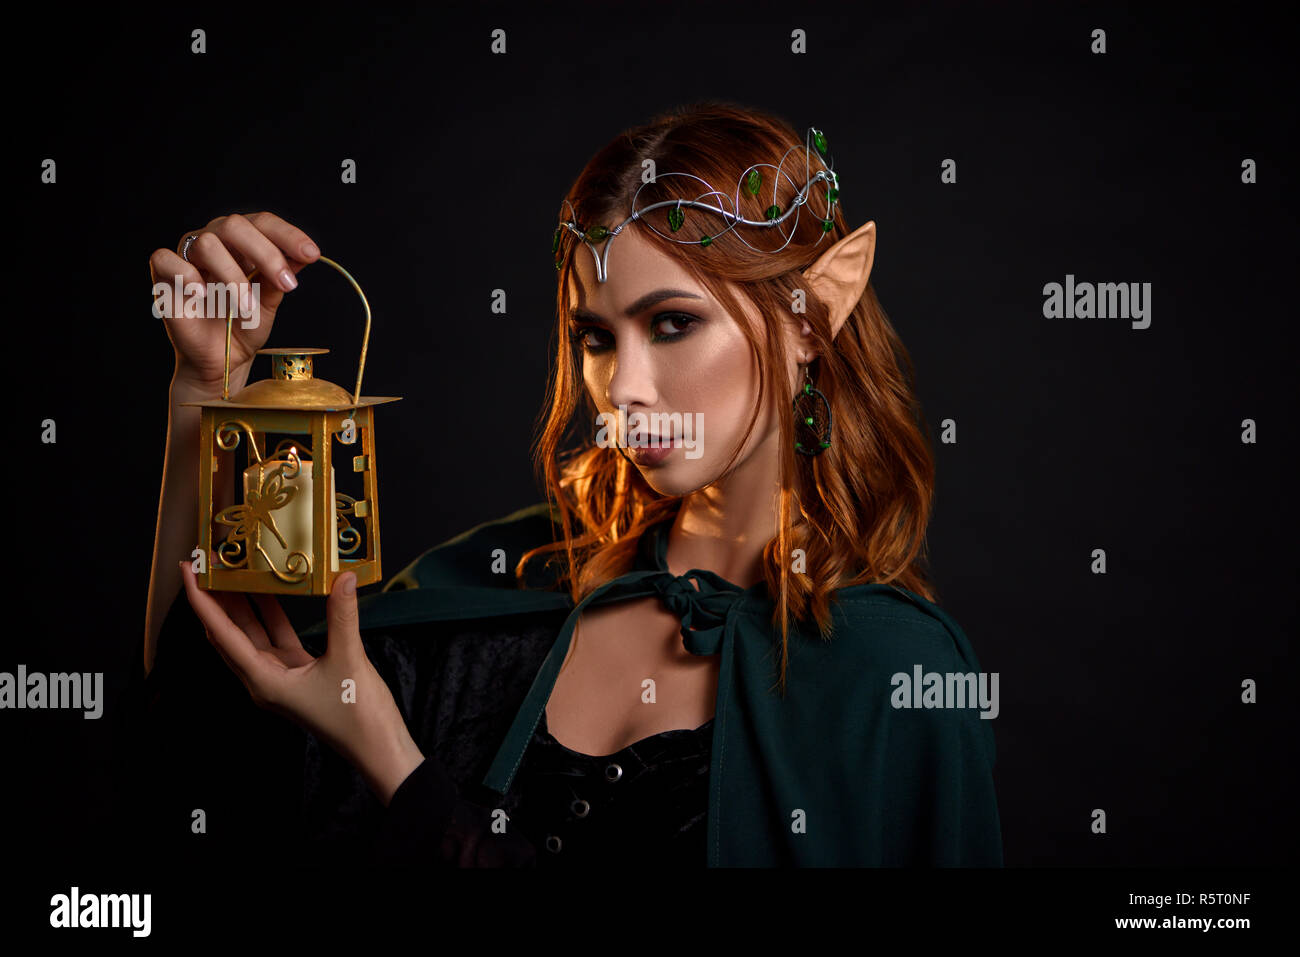 Portrait of charming mythical creature with red hair, in black dress and dark green cloak. Young beautiful elf with tiara on head holding in her hand golden lantern with white candle inside. Stock Photo